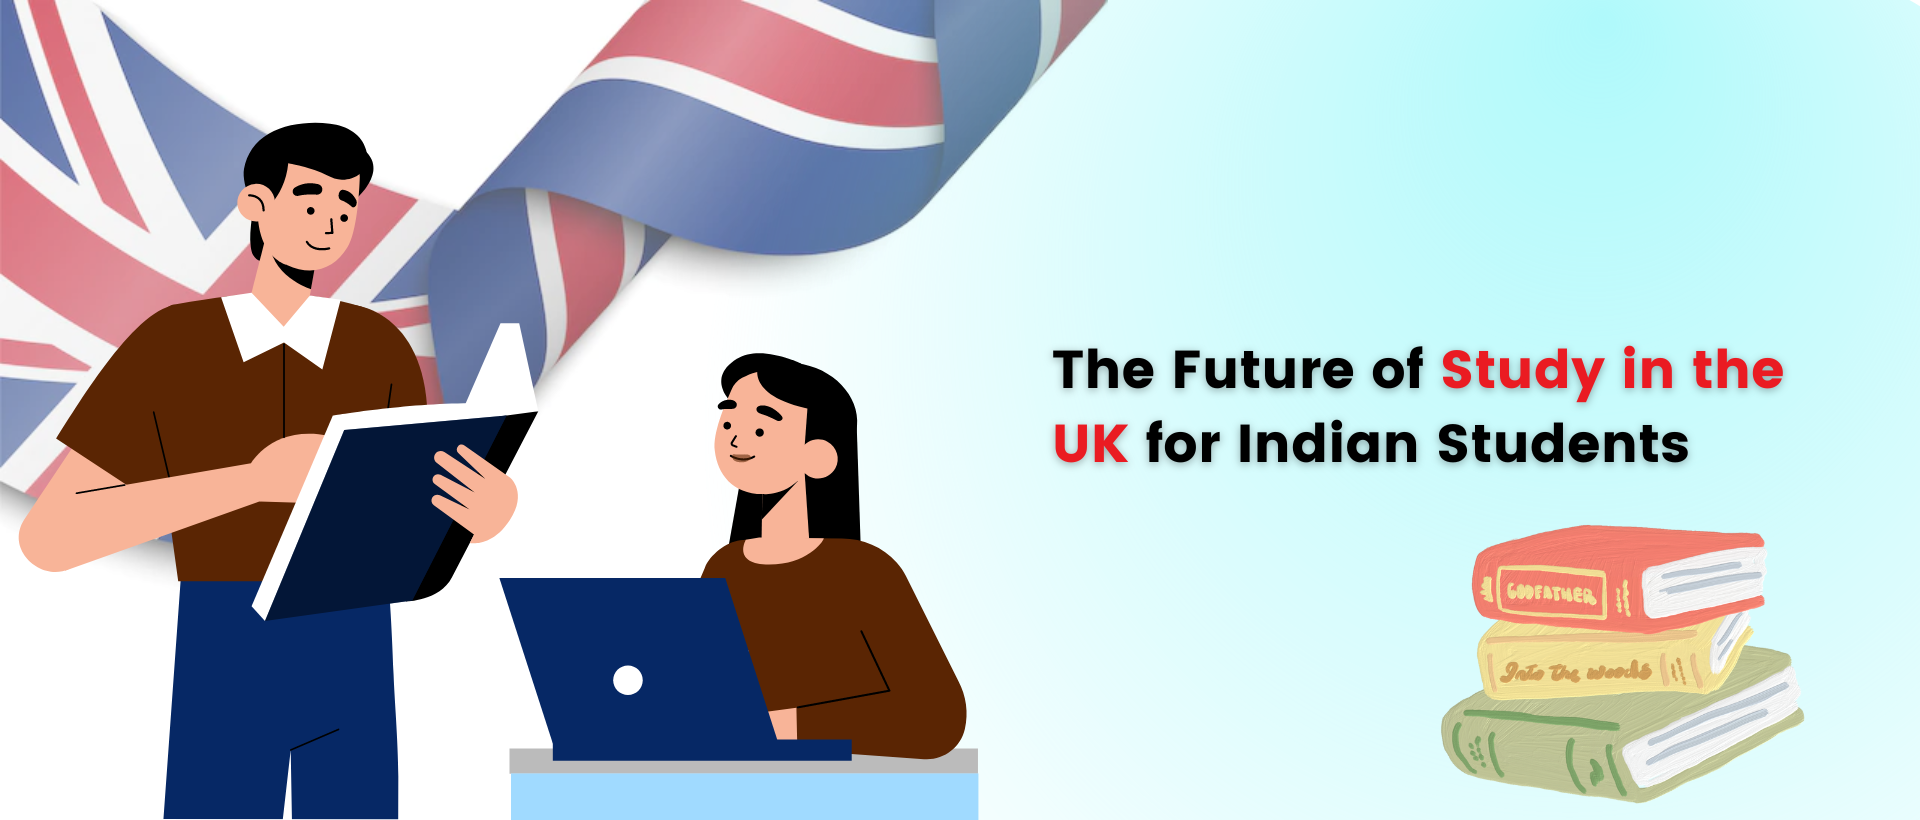 The future of study in the uk for indian students